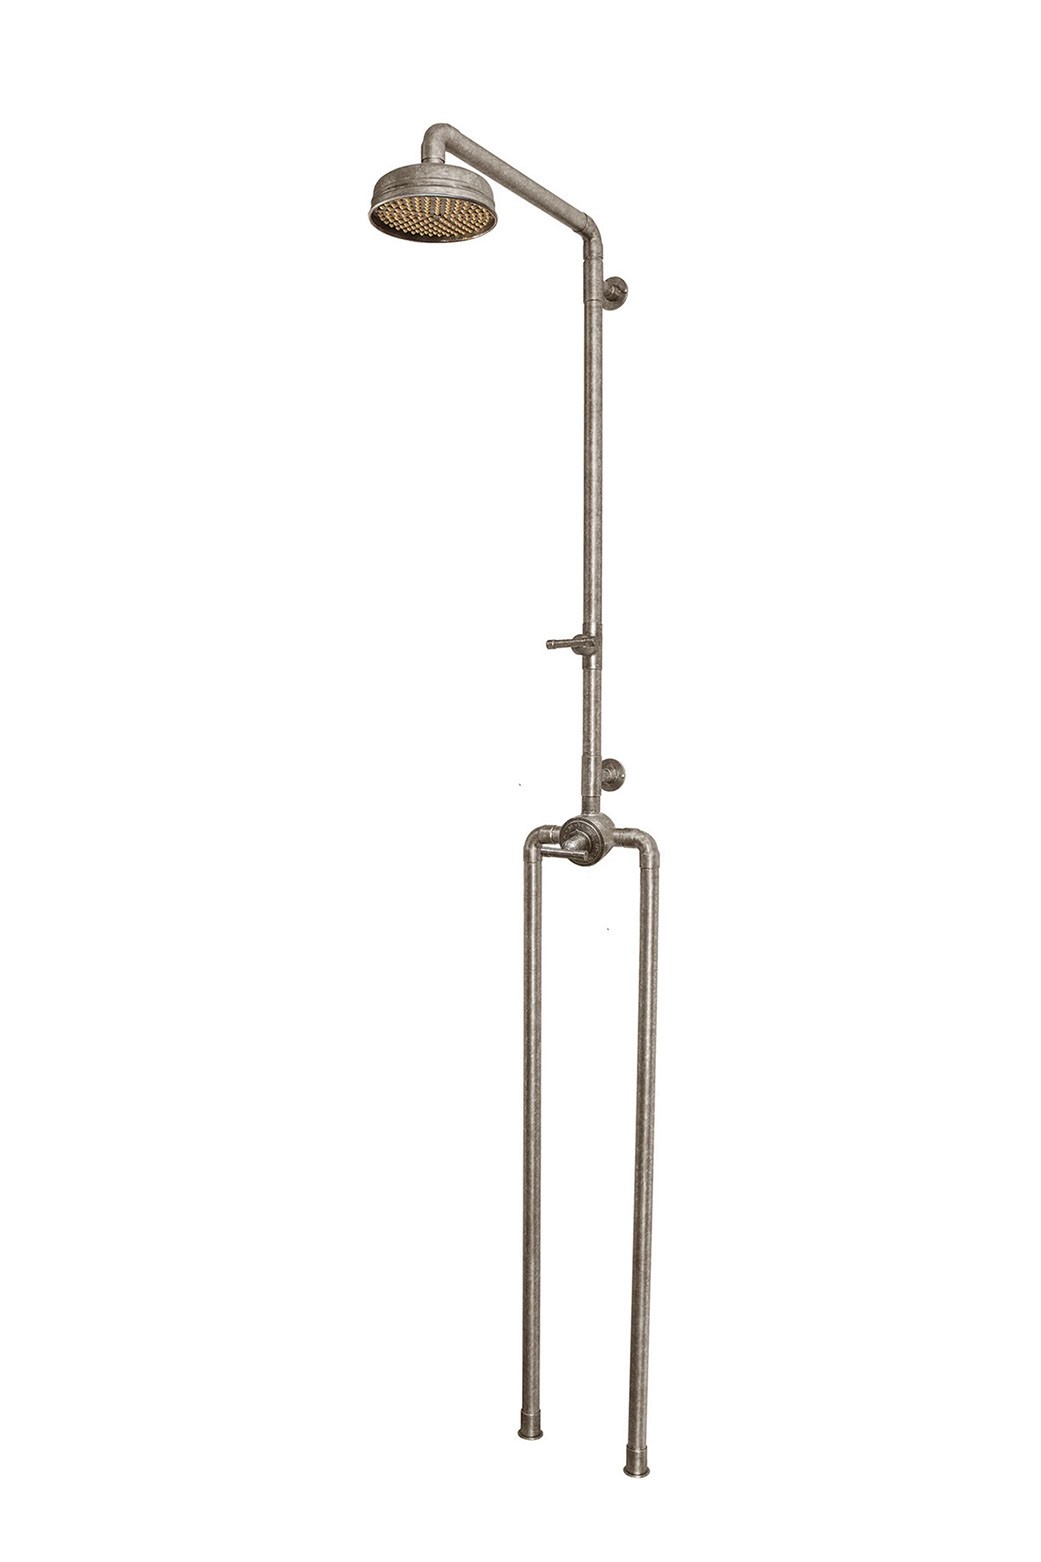 SONOMA FORGE WB-SHW-1140 WATERBRIDGE 91 1/2 INCH FLOOR MOUNT EXPOSED THERMOSTATIC SHOWER SYSTEM